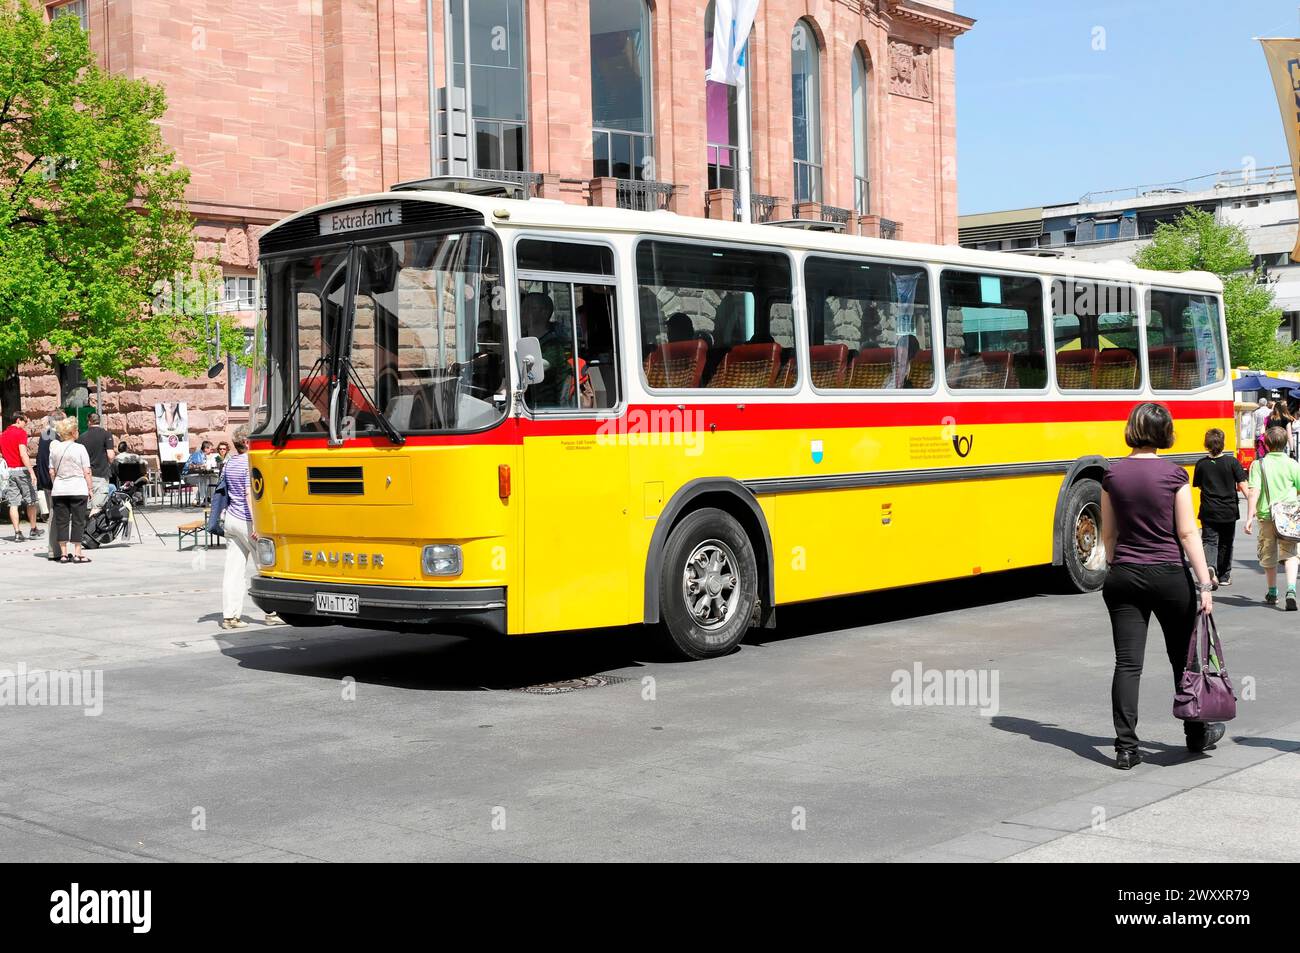 Yellow city bus with red accents in use in an urban environment, Mainz, Rhineland-Palatinate, Germany Stock Photo